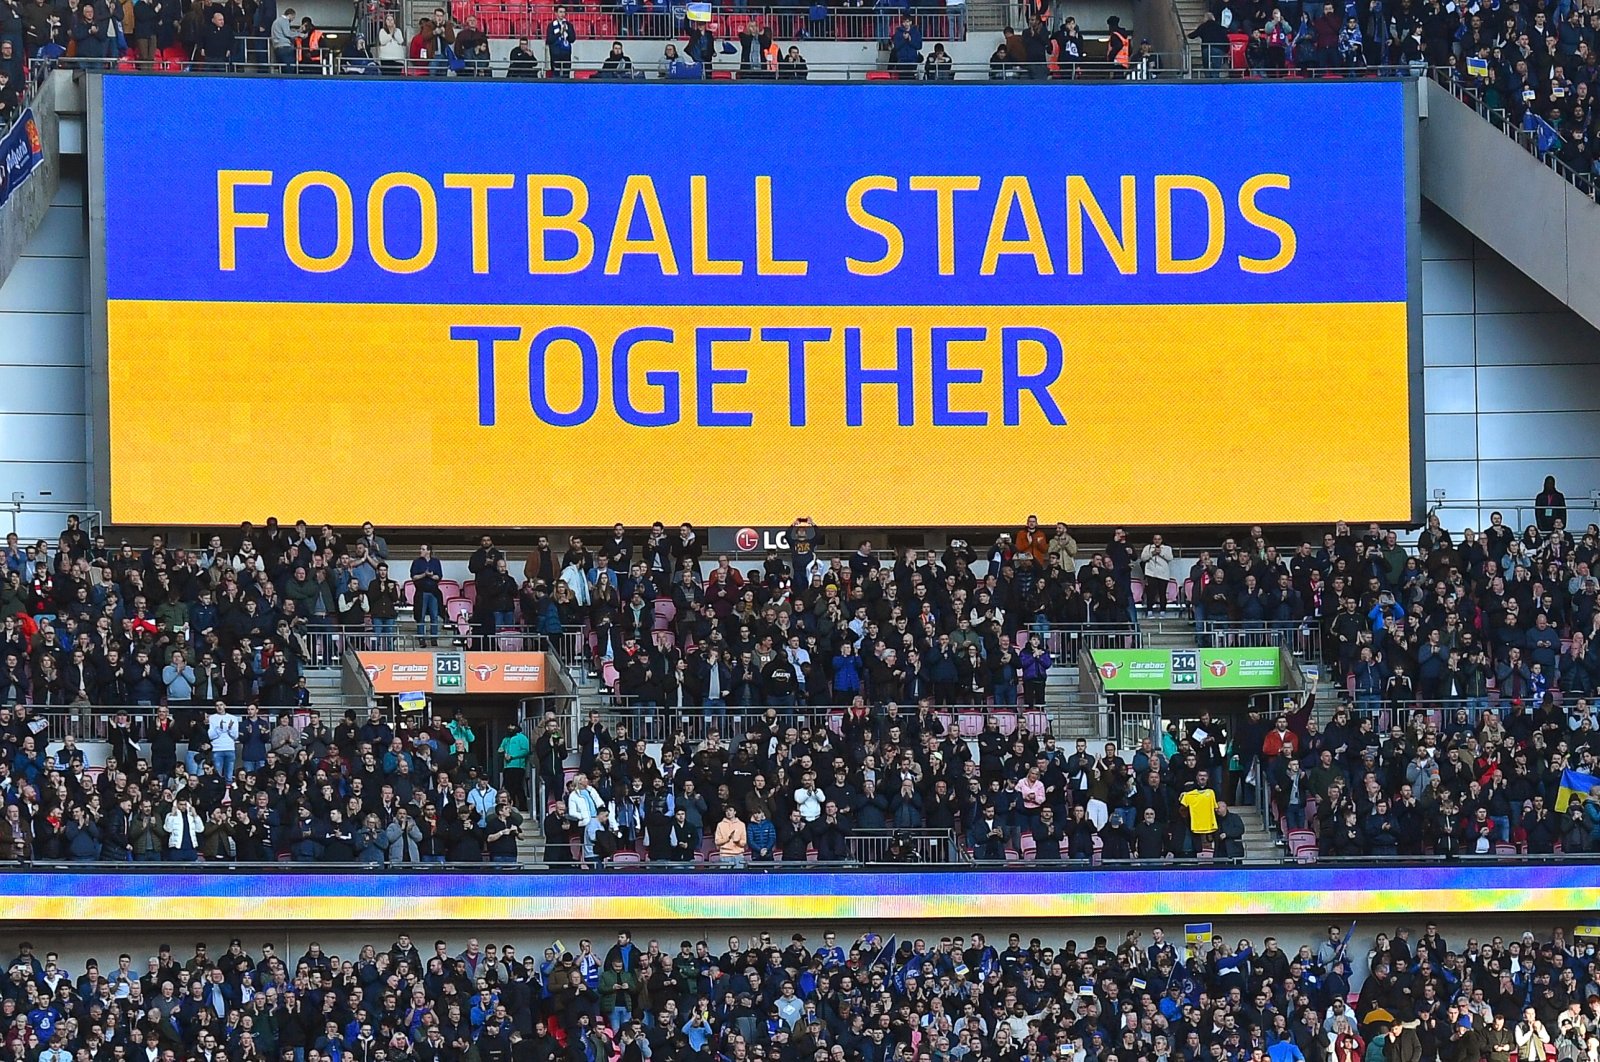 The slogan "Football stands together" is seen on a huge screen before the English Carabao Cup final between Chelsea FC and Liverpool FC at Wembley in London, Britain, Feb. 27, 2022. (EPA Photo)